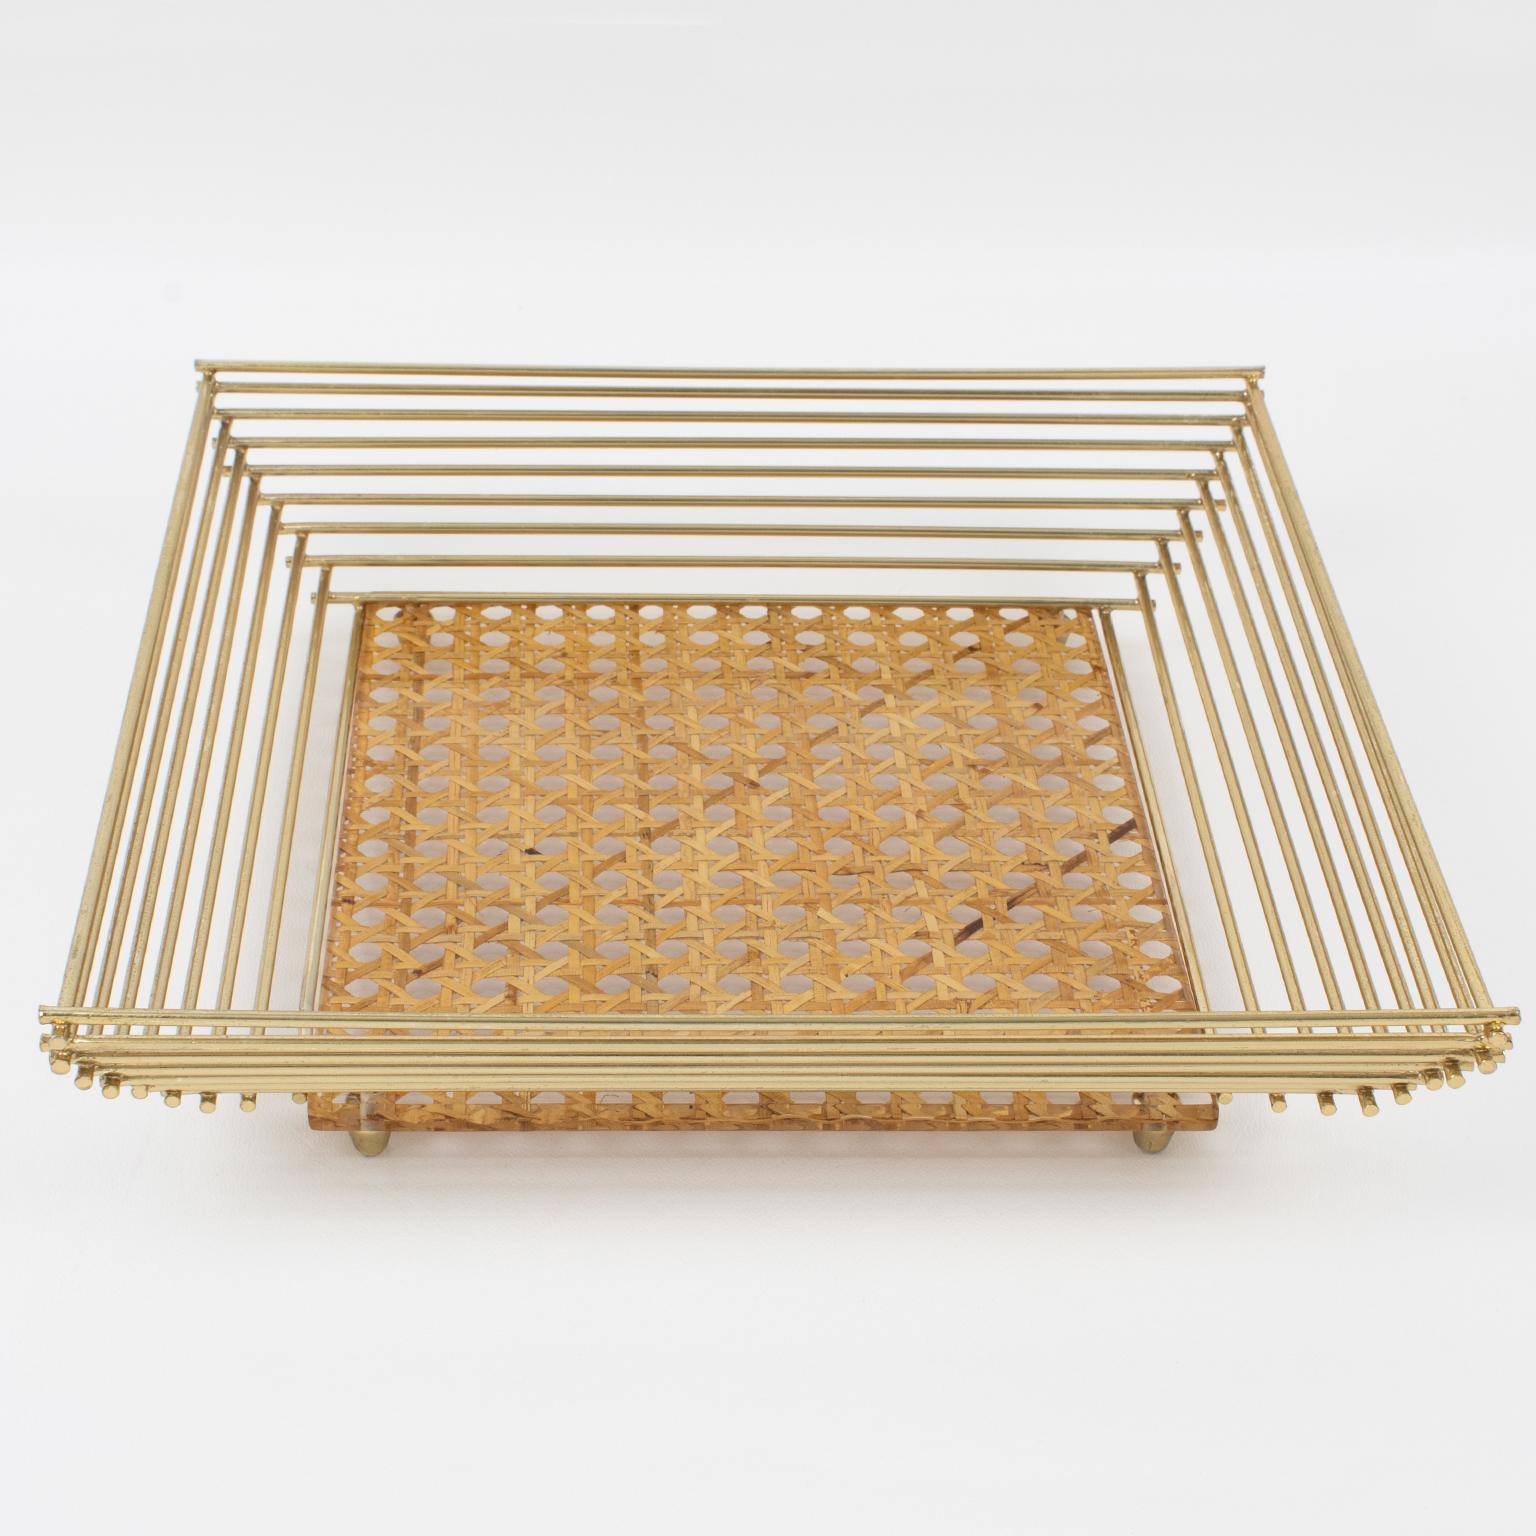 Lucite, Rattan or Wicker and Brass Barware Serving Tray, Italy 1970s In Good Condition For Sale In Atlanta, GA